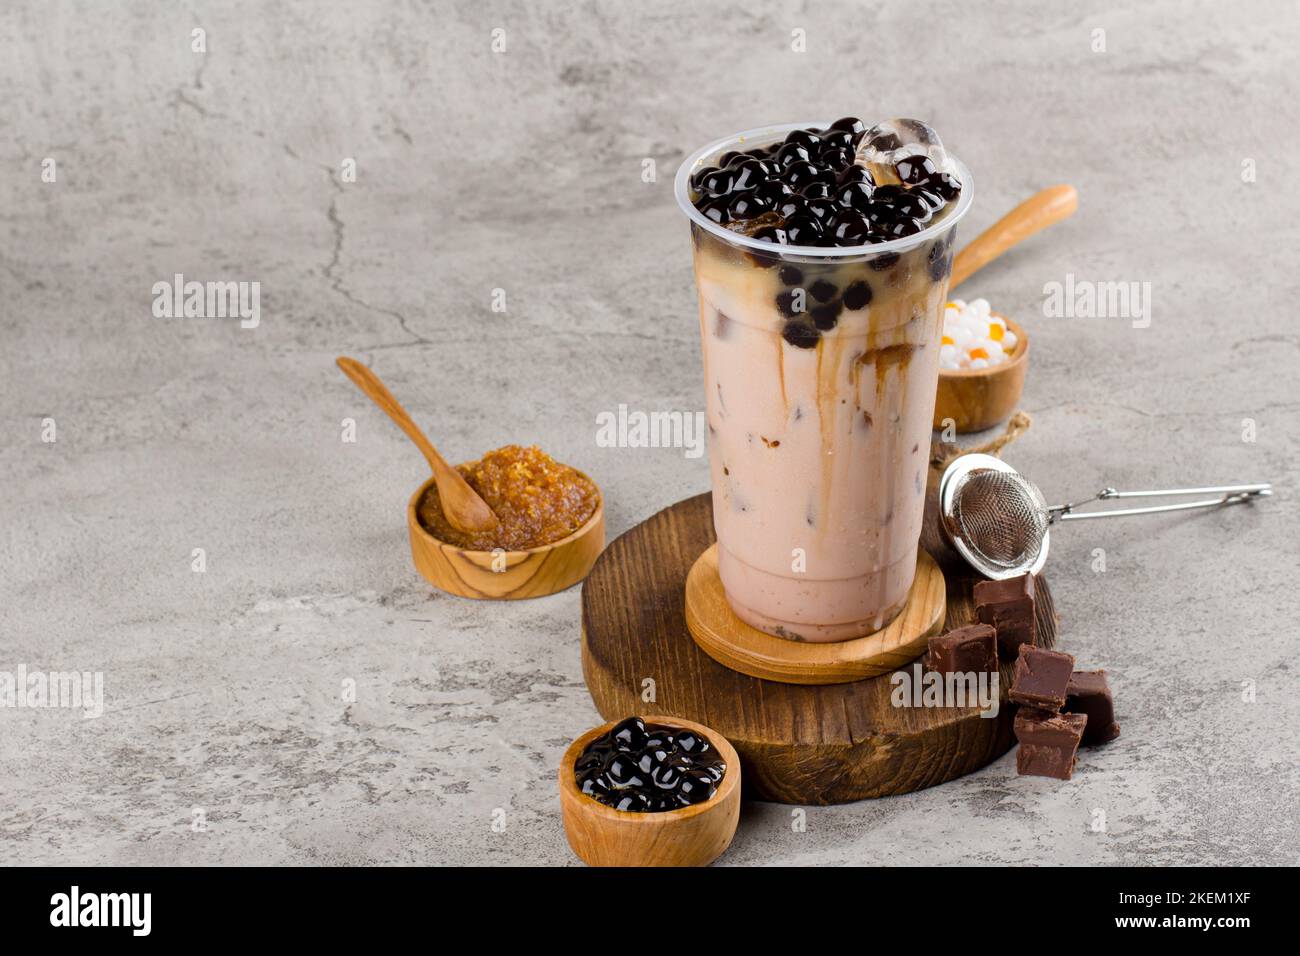 https://c8.alamy.com/comp/2KEM1XF/boba-or-tapioca-pearls-is-taiwan-bubble-milk-tea-in-plastic-cup-with-coffee-flavor-on-texture-background-summers-refreshment-2KEM1XF.jpg